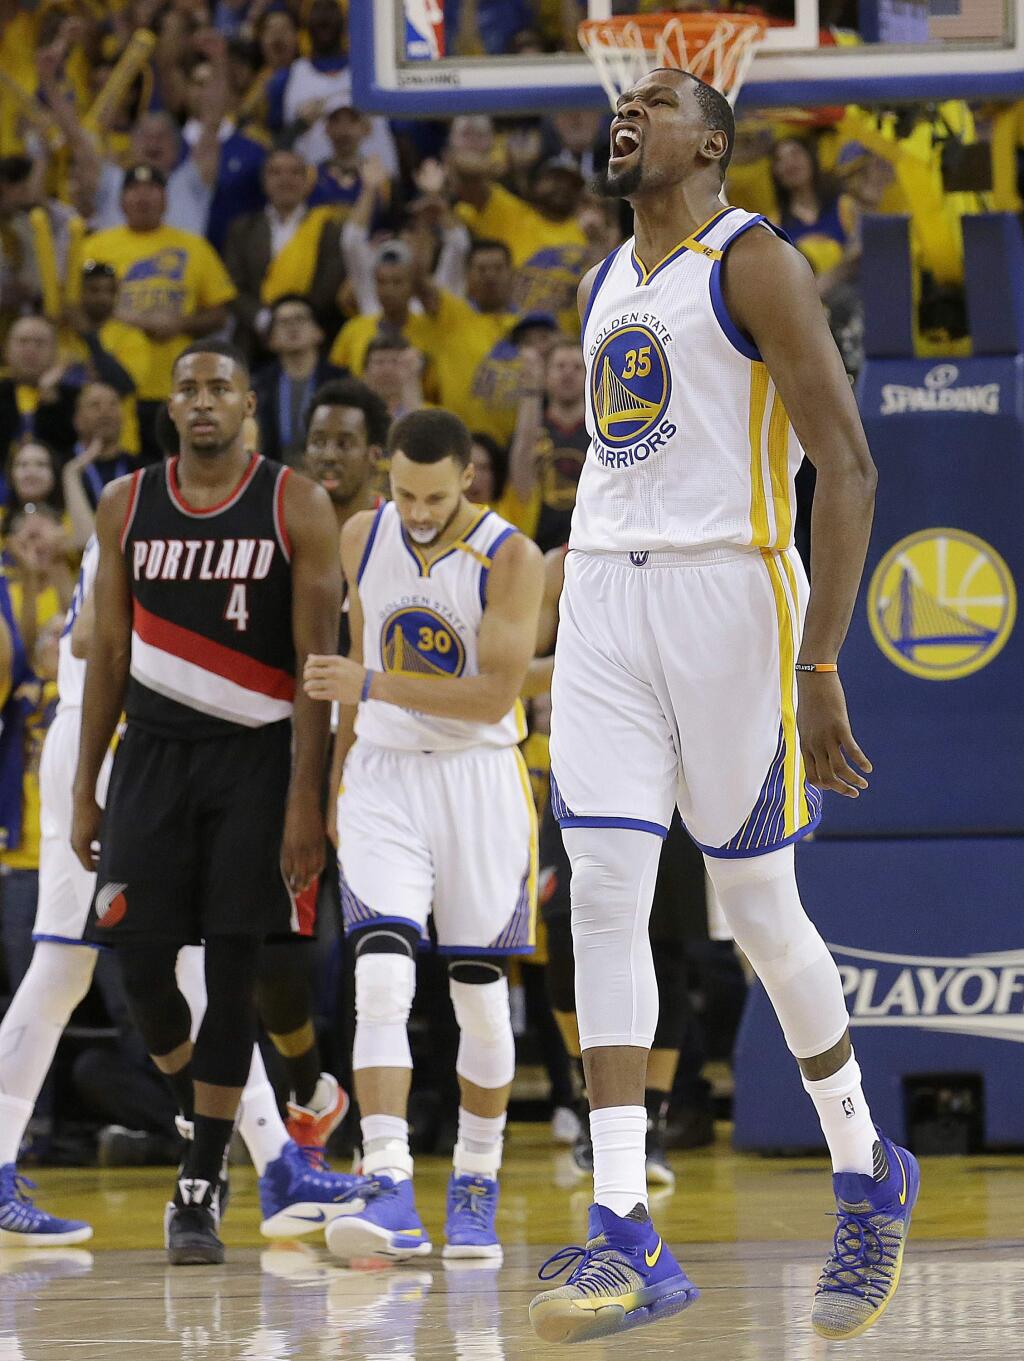 Golden State Warriors forward Kevin Durant (35) reacts after scoring against the Portland Trail Blazers during the second half of Game 1 of a first-round NBA basketball playoff series in Oakland, Calif., Sunday, April 16, 2017. The Warriors won 121-109. (AP Photo/Jeff Chiu)